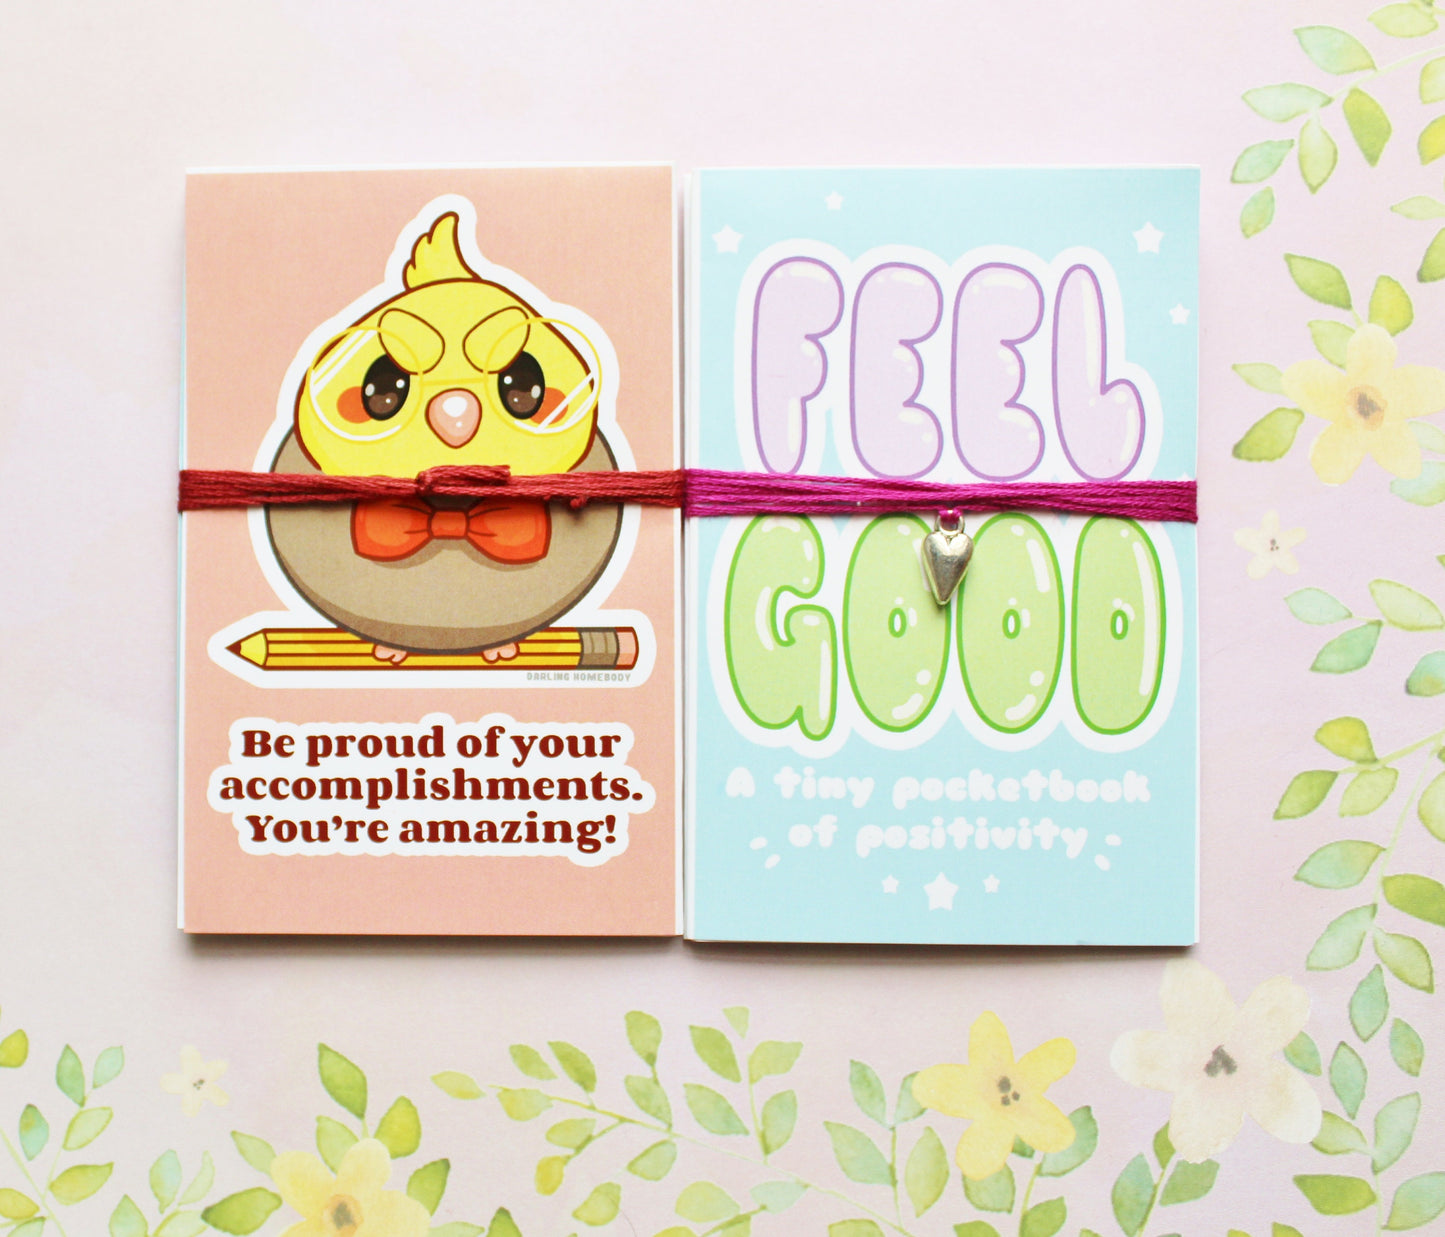 Feel Good Miniature Book of Positive Quotes & Affirmations. Inspirational Positive Vibes. Cute Little Gift for Depression. Motivational.